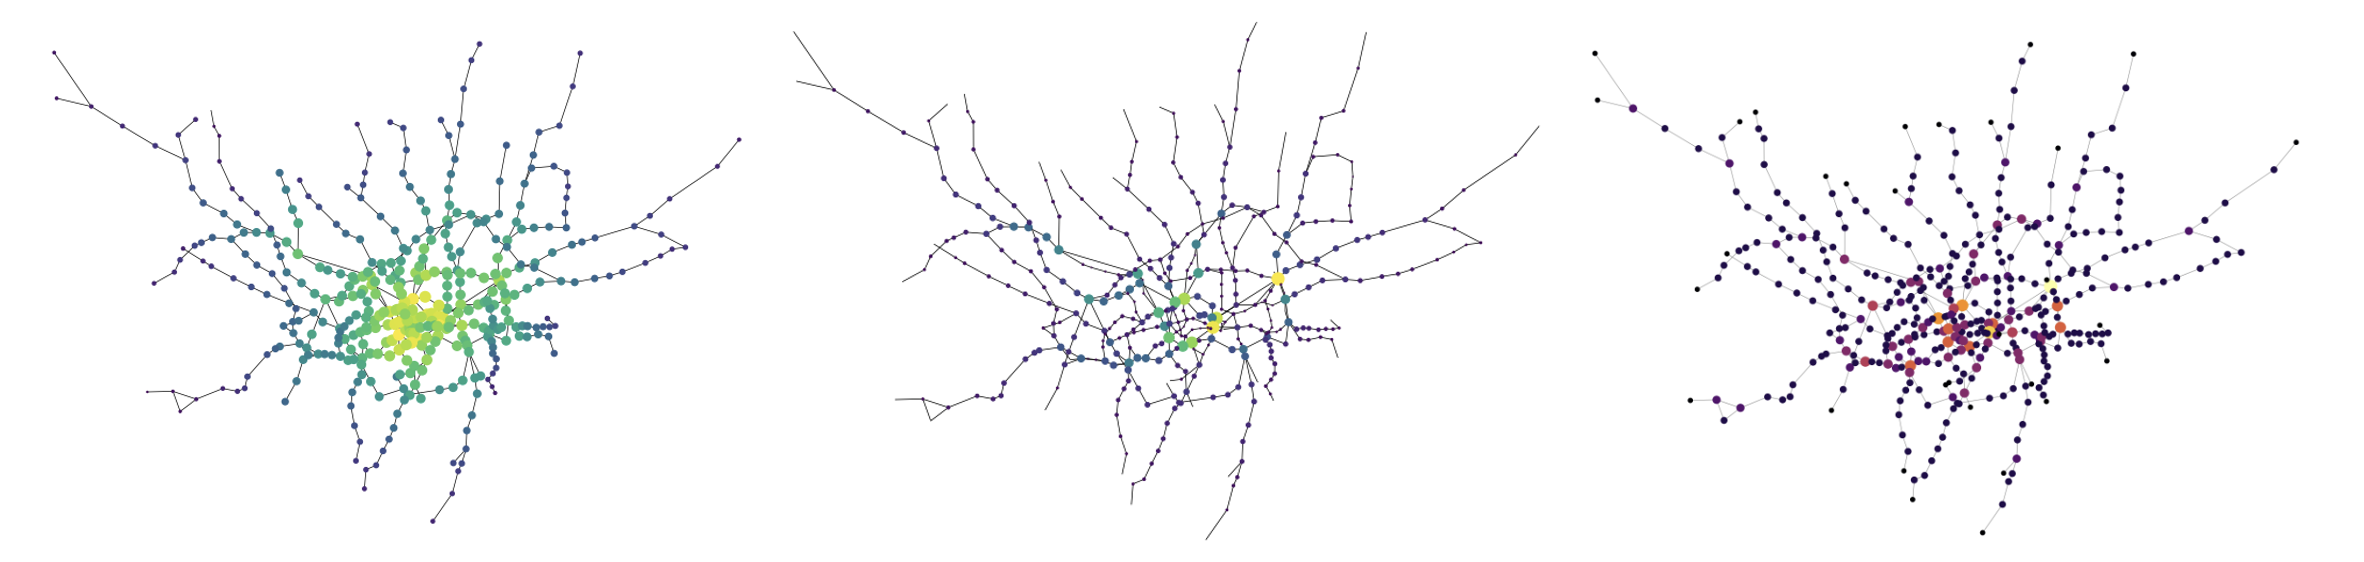 Resilience Analysis of the London Tube